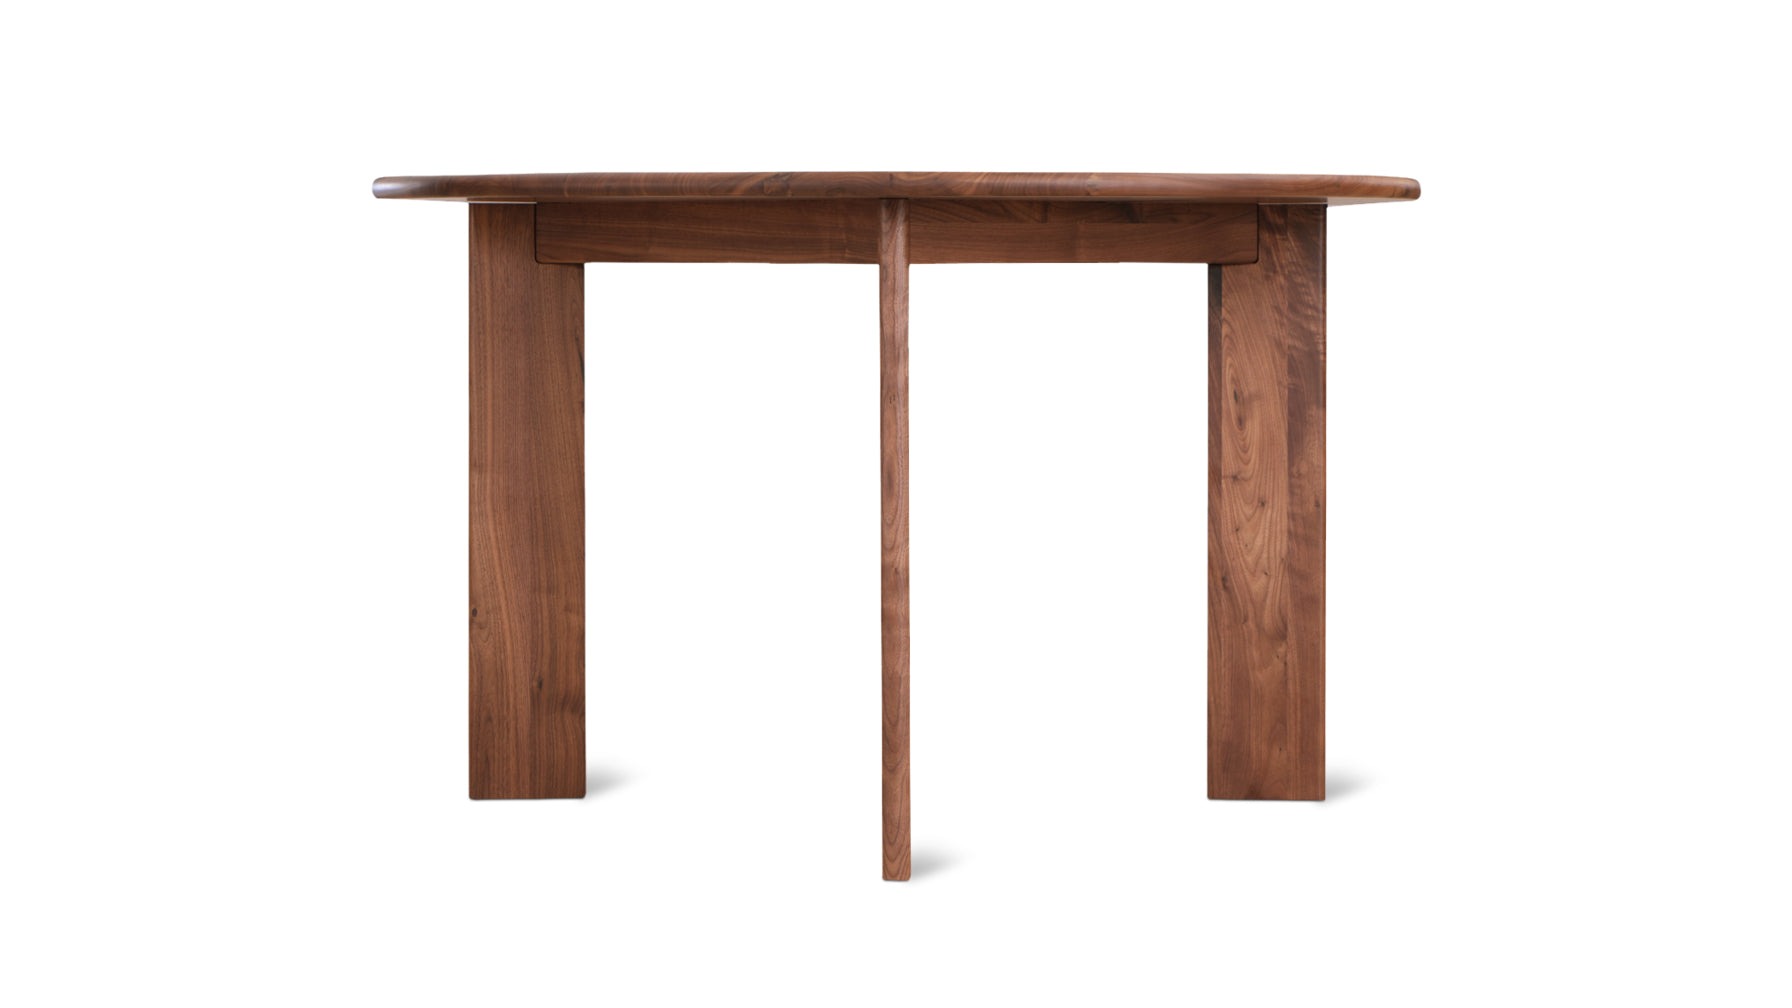 Frame Round Dining Table, Seats 4-5 People, Walnut - Image 5